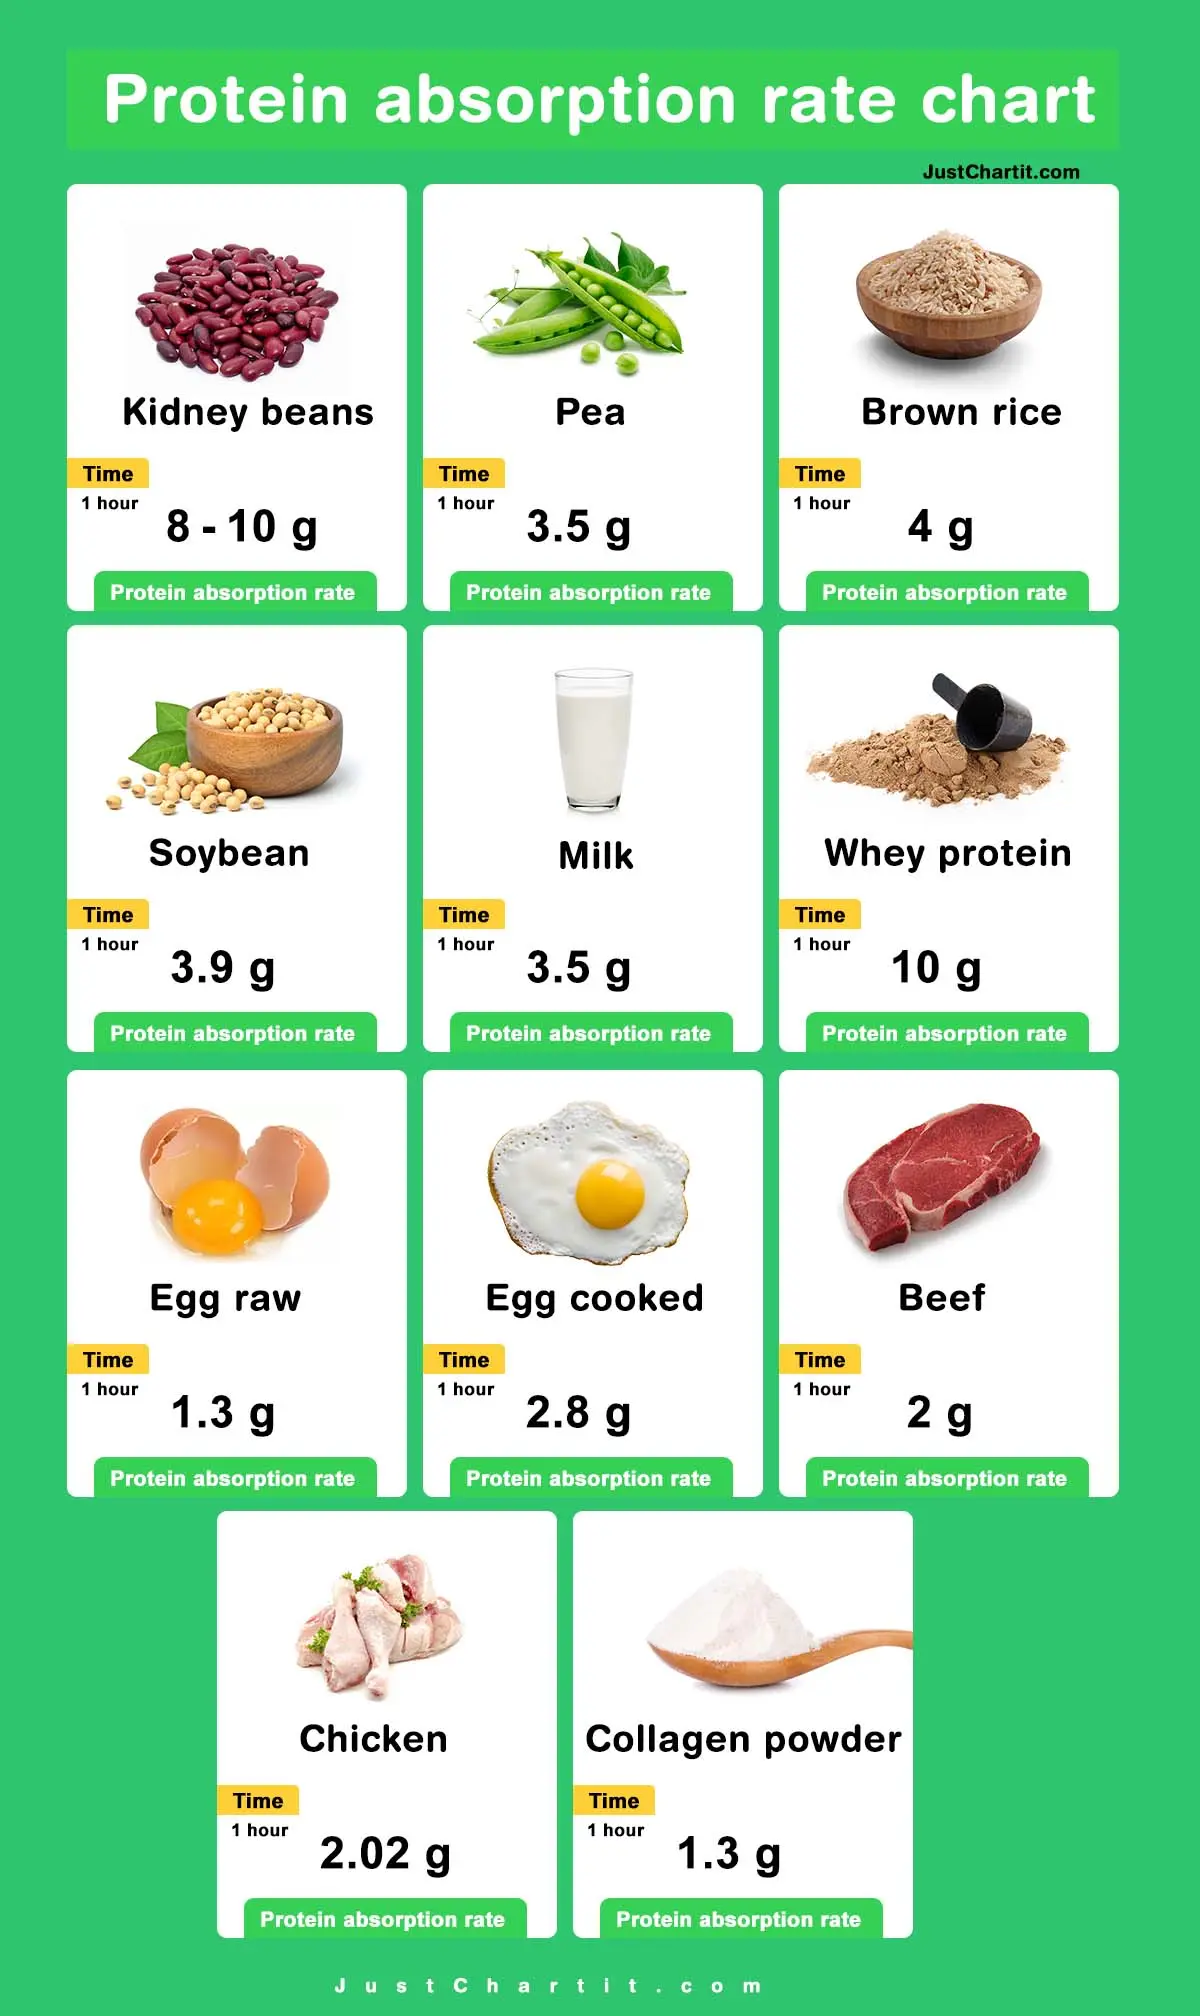 Protein absorption rate chart